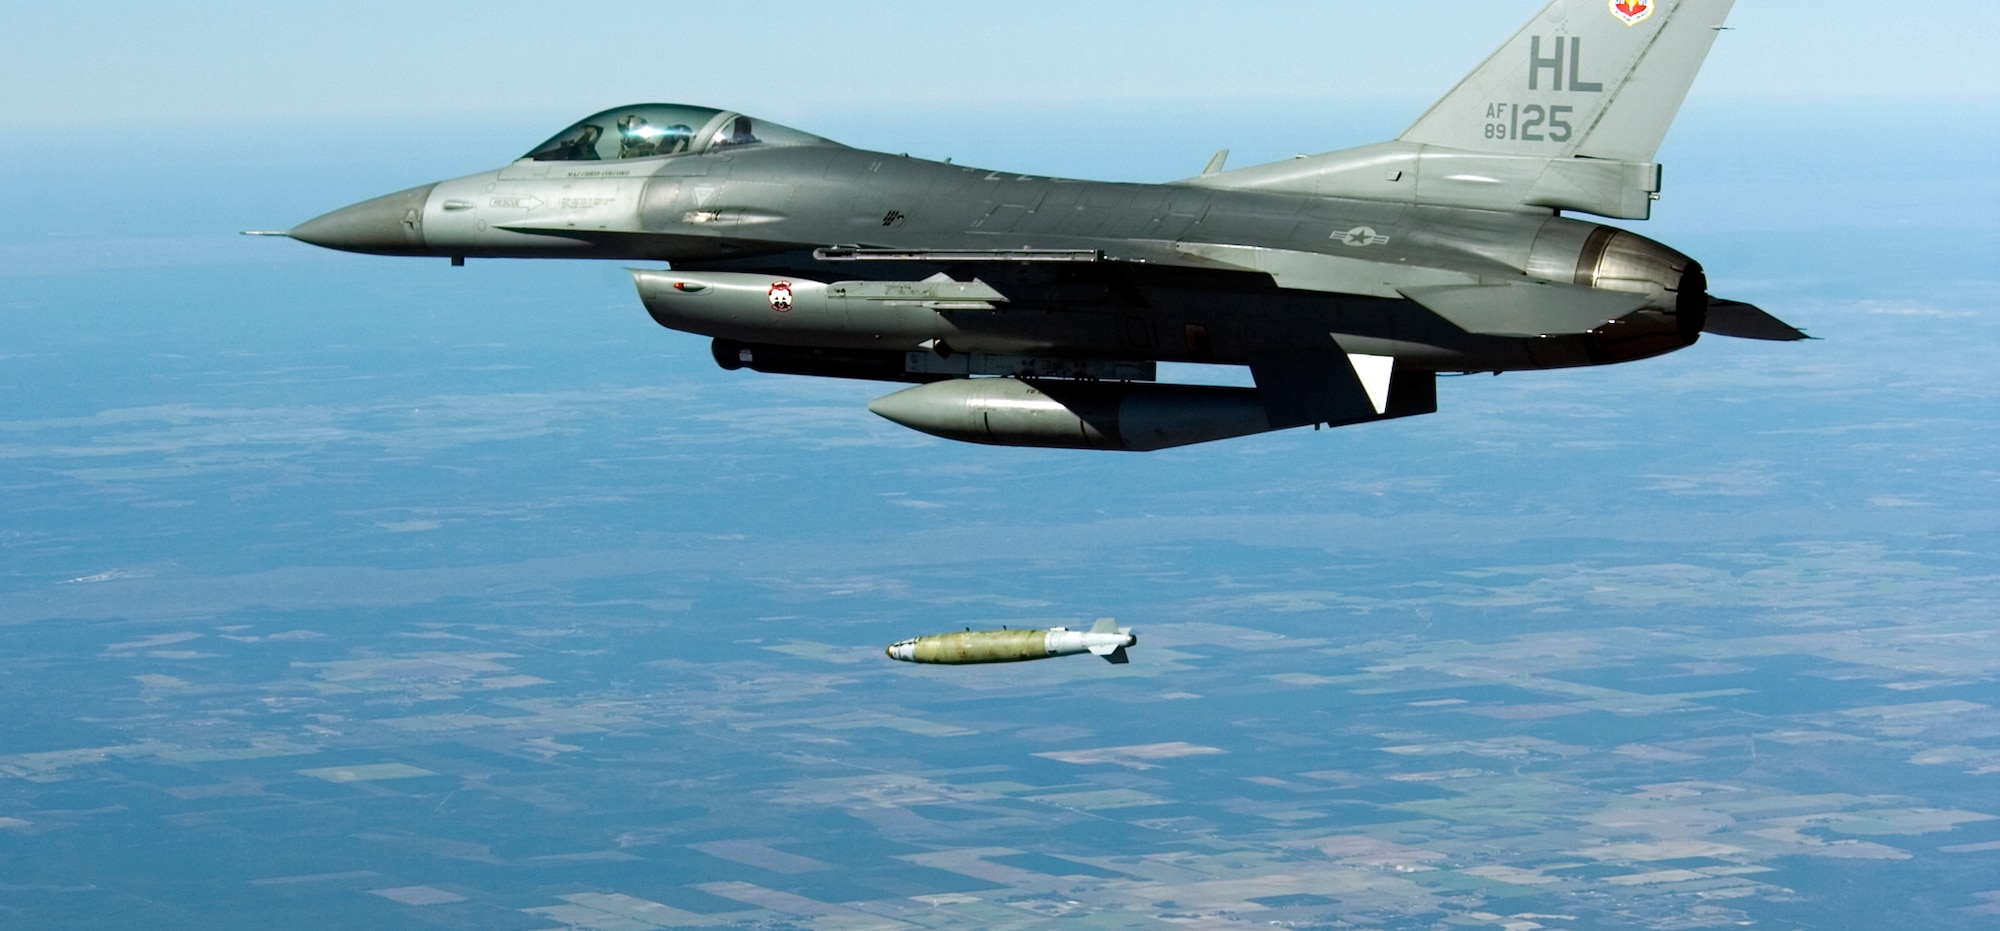 A F-16 Fighting Falcon from the 34th Fighter Squadron at Hill Air Force Base, Utah, drops a bomb during the Combat Hammer portion of a mission, Jan 14 over the Eglin Air Force Base range in Florida.  The 34 FS participated in the first-ever combined Weapons System Evaluation Program.  This WSEP combined the live air-to-air missile firing of Combat Archer and the air-to-ground bomb drops of Combat Hammer into one continuous mission.  This major undertaking brought together the WSEP evaluators from the 83rd Fighter Weapons Squadron, located at Tyndall Air Force Base, Fla., and the 86th Fighter Weapons Squadron at Eglin.  This new combined mission began with the aircraft load and launch from Tyndall.  Then the pilot performed a live missile firing over the Gulf of Mexico.  After the missile launch, the pilot connected with a KC-135 Stratotanker from MacDill Air Force Base, Fla., for refueling.  Then, the pilot flew over the Eglin range to perform a live bomb drop.  (U.S. Air Force photo\Tech Sgt. Jason Wilkerson.)